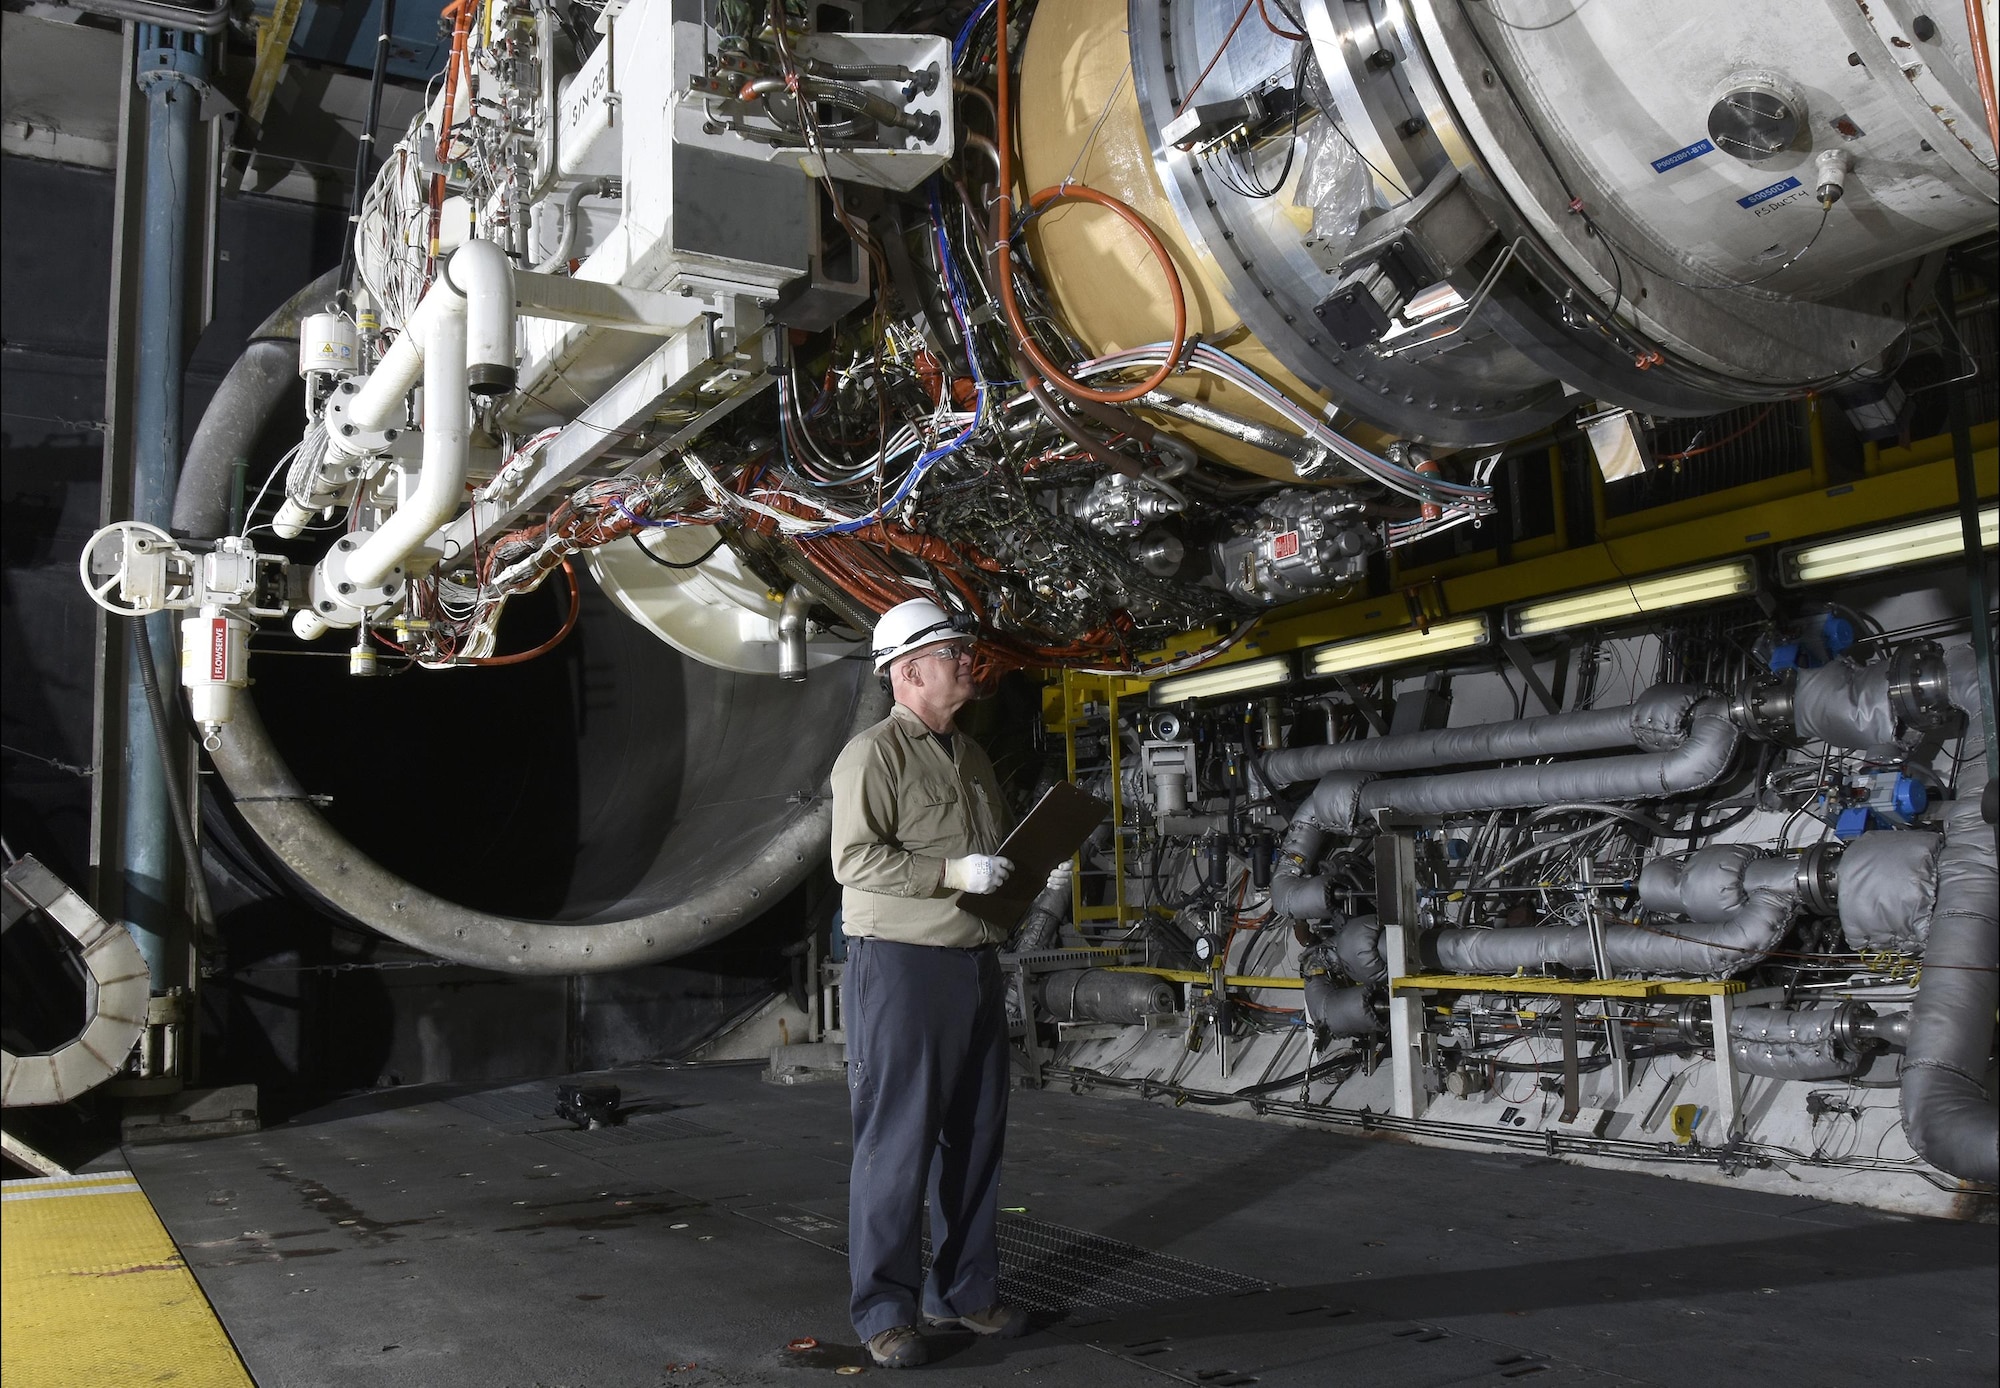 Neil Aukeman, AEDC outside machinist, prepares the General Electric Passport 20 engine, which powers the Bombardier Global 7000 and 8000 business jets, for testing in an engine test cell at AEDC. (U.S. Air Force photo/Rick Goodfriend)